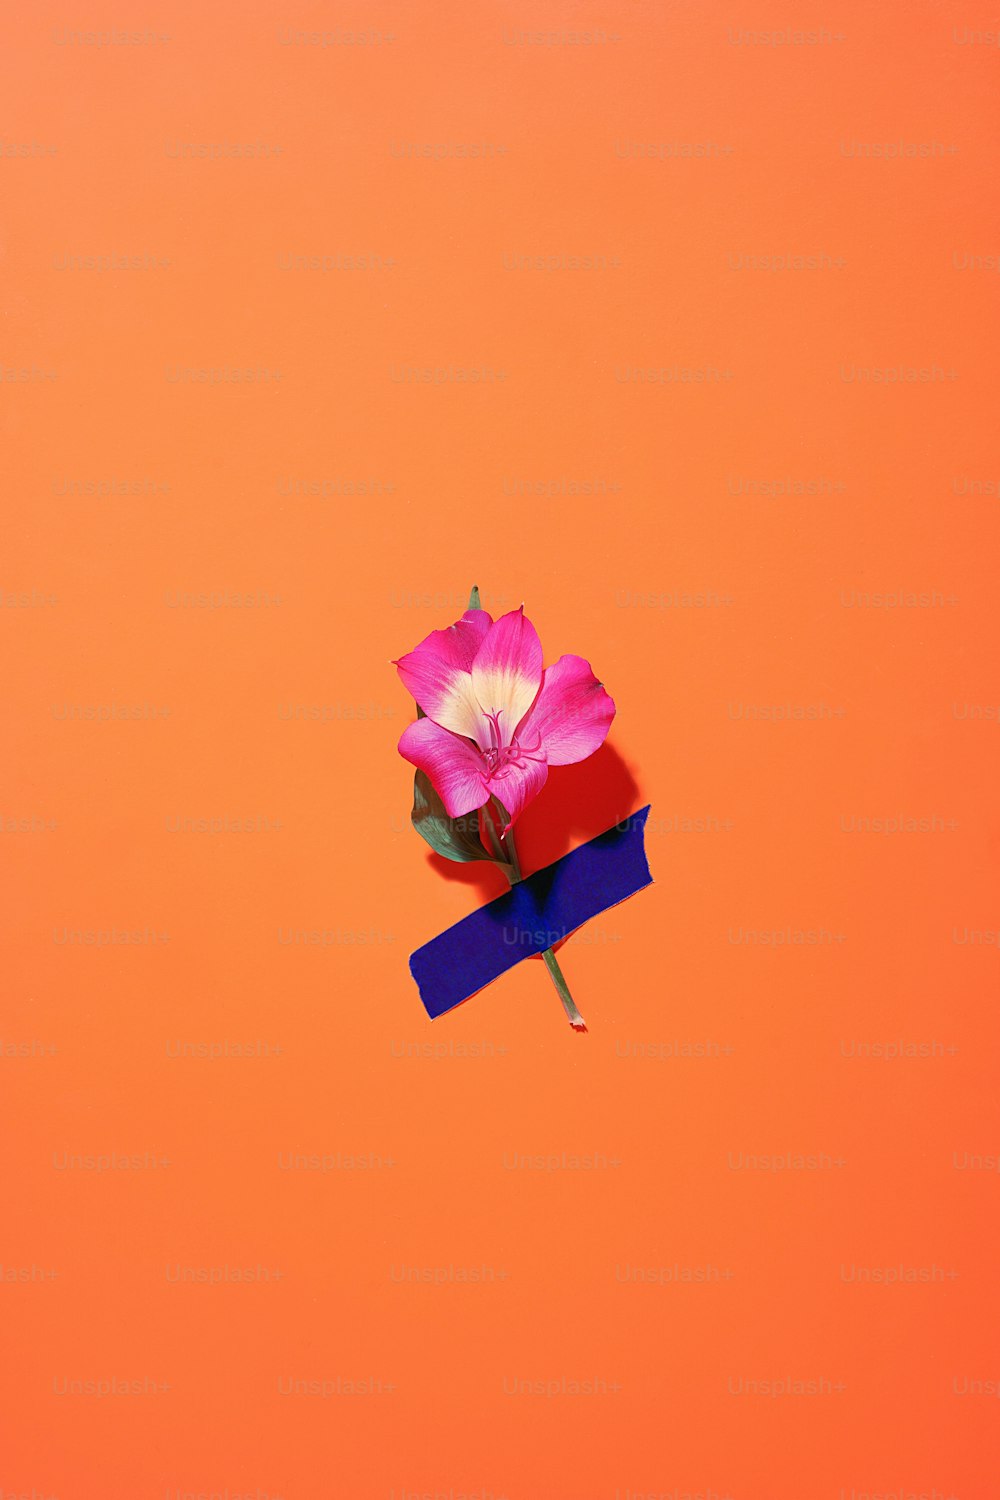 a single pink flower on top of a blue ribbon